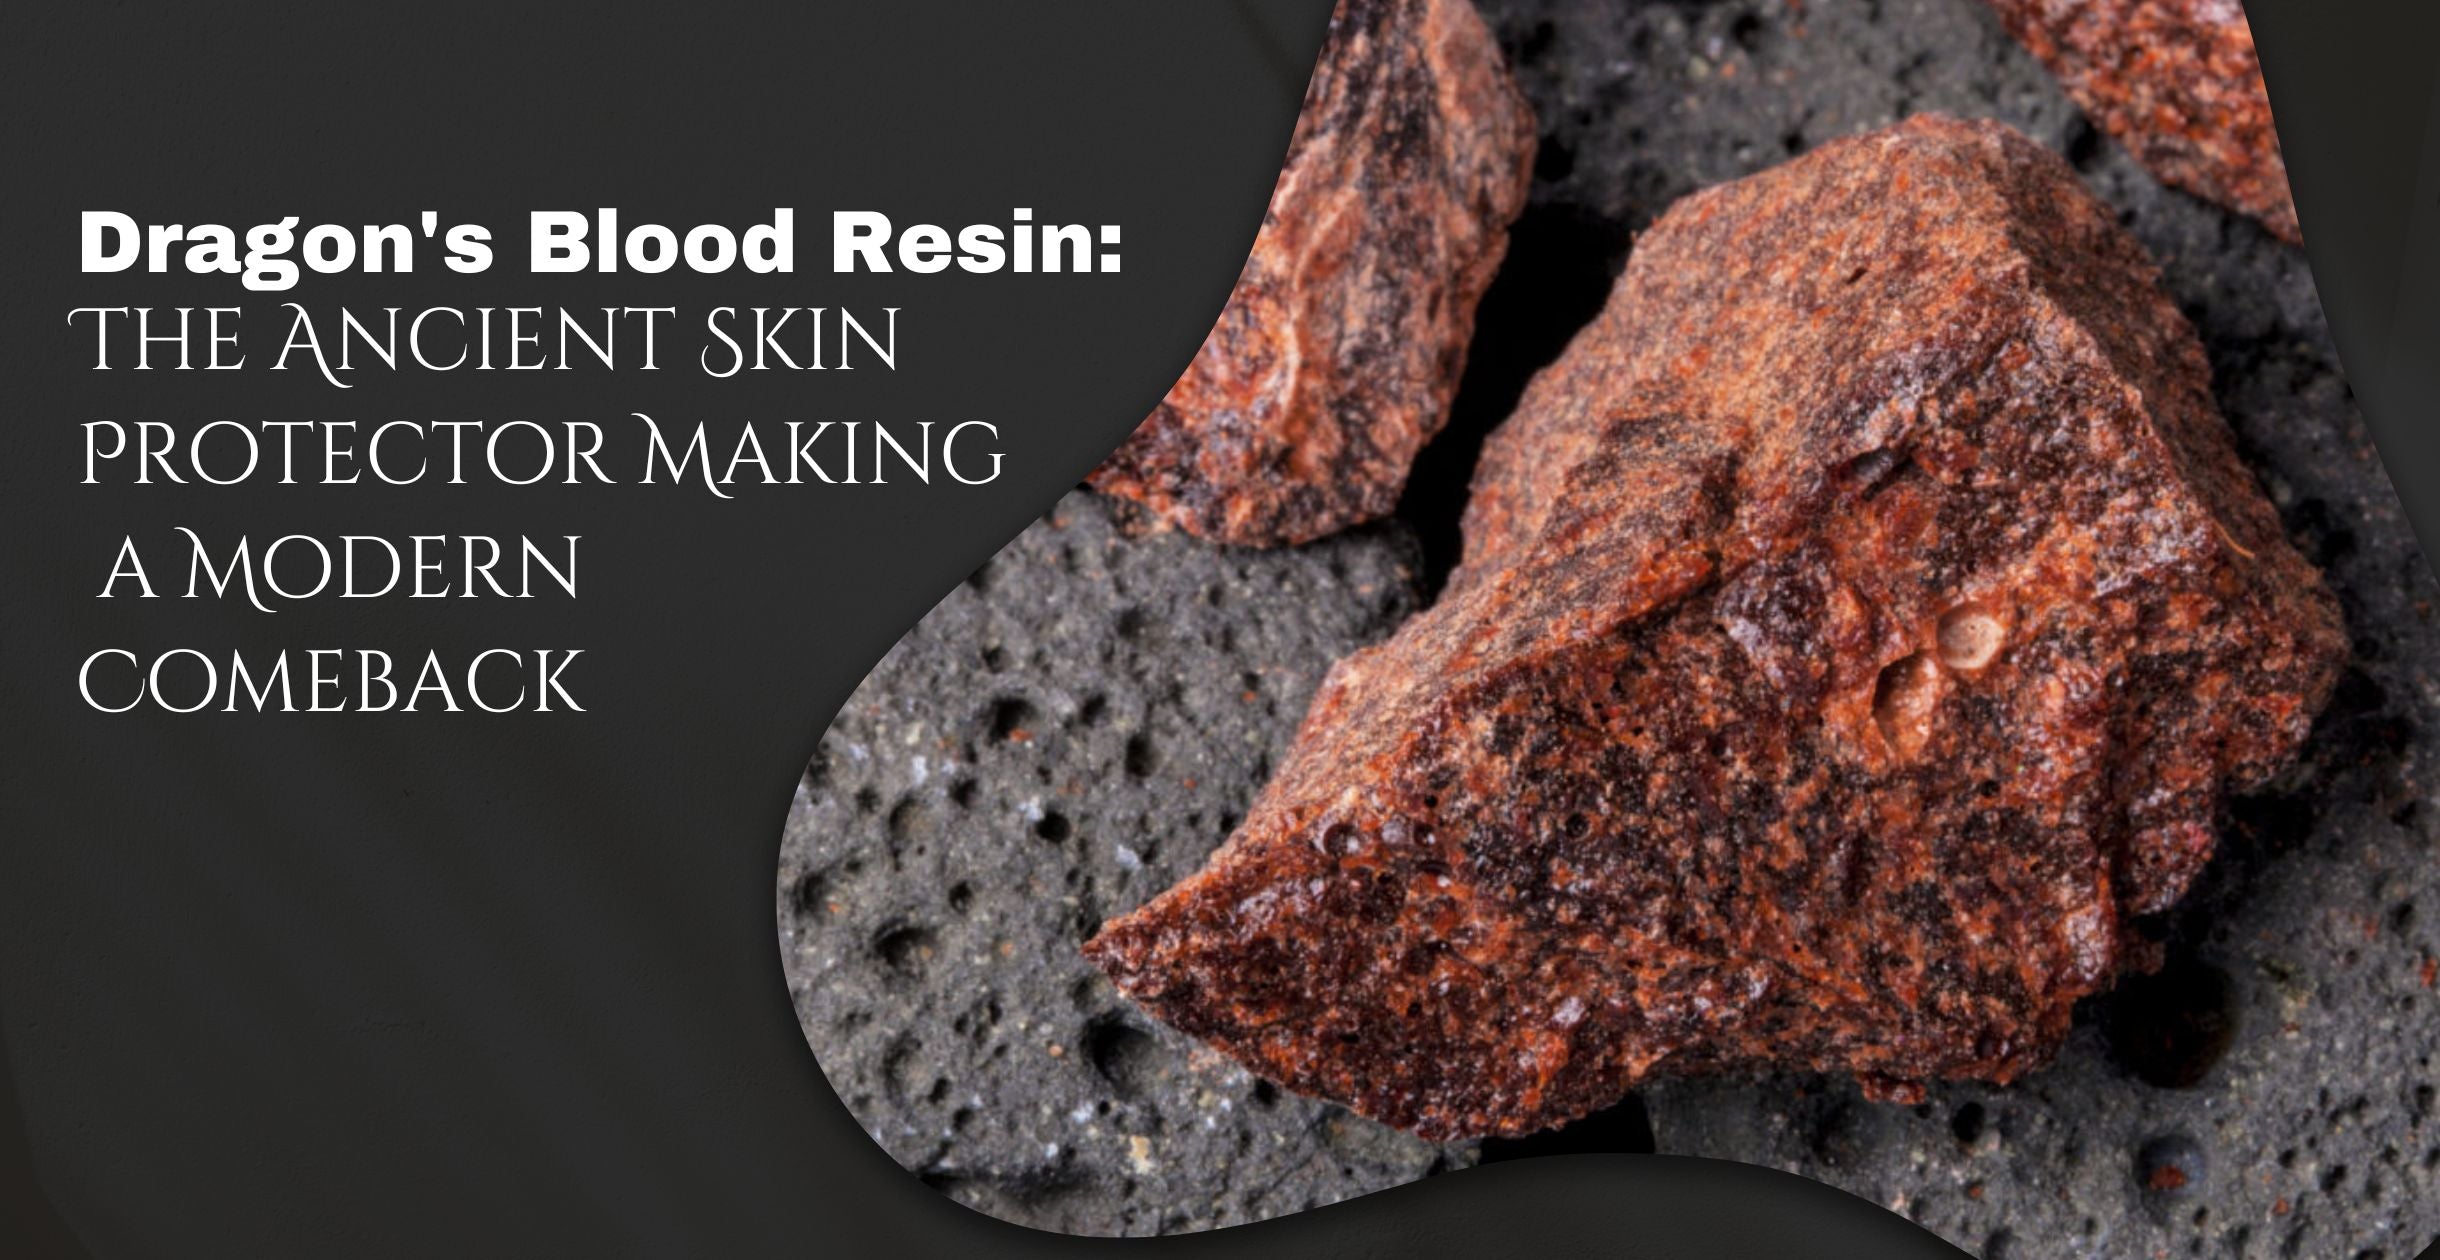 Dragon's Blood Resin: The Ancient Skin Protector Making a Modern Comeback